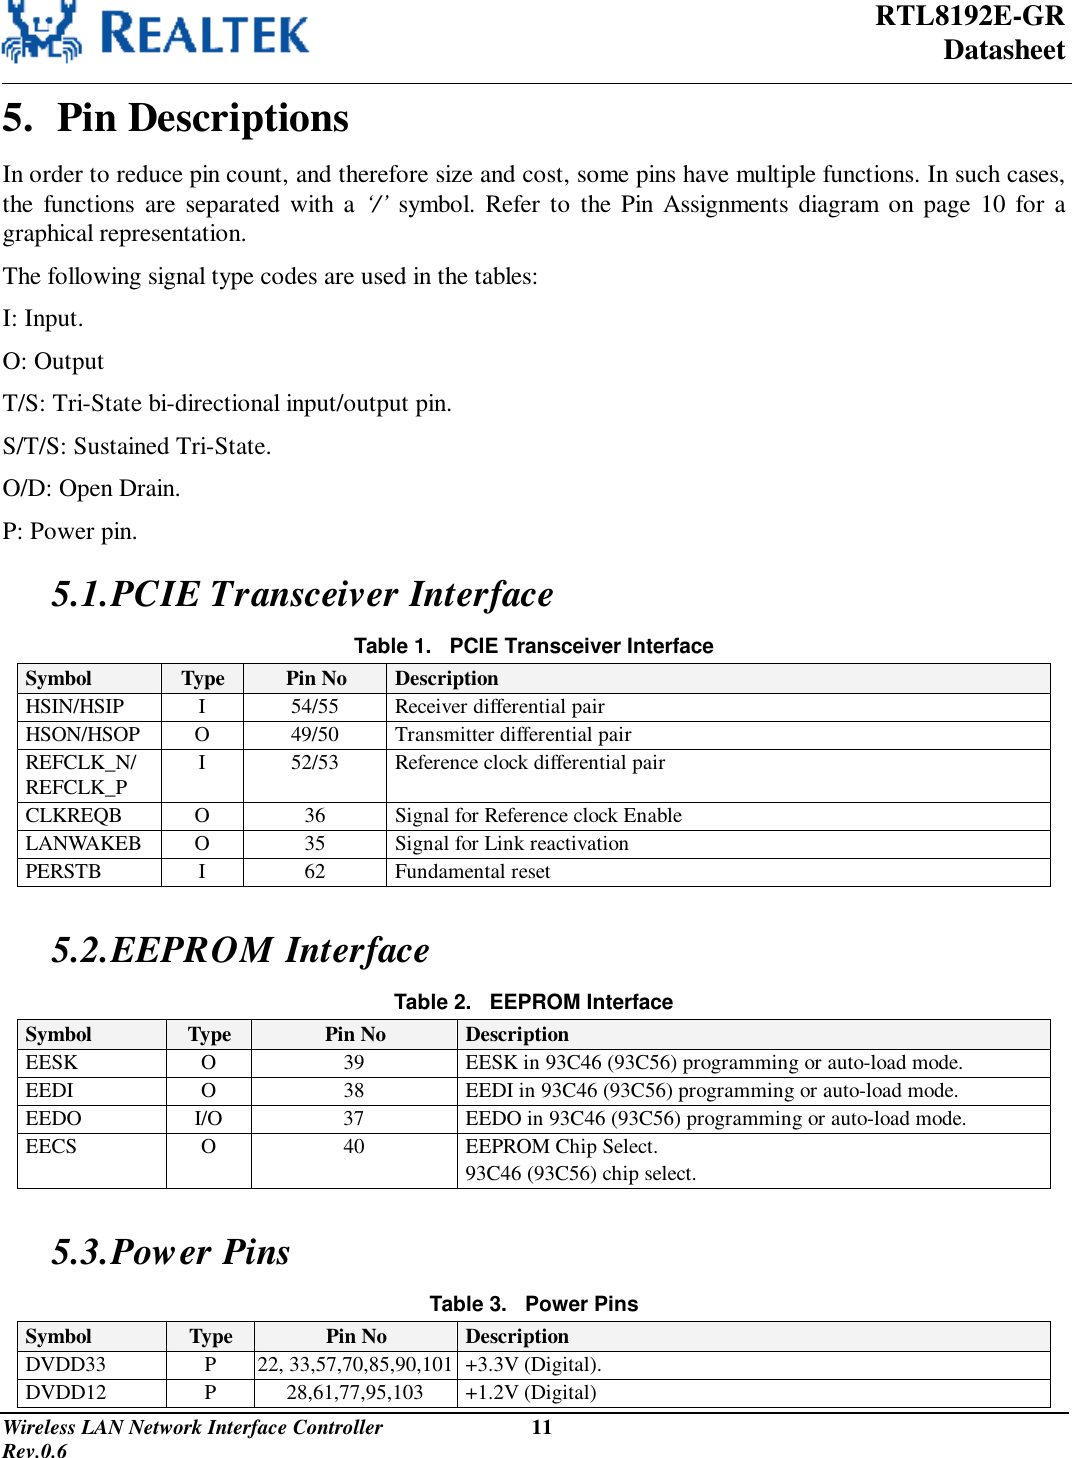  RTL8192E-GR Datasheet Wireless LAN Network Interface Controller                           11                                                                                         Rev.0.6  5.  Pin Descriptions In order to reduce pin count, and therefore size and cost, some pins have multiple functions. In such cases, the functions are separated with a  ‘/’ symbol. Refer to the Pin Assignments diagram on page 10 for a graphical representation. The following signal type codes are used in the tables: I: Input. O: Output T/S: Tri-State bi-directional input/output pin. S/T/S: Sustained Tri-State. O/D: Open Drain. P: Power pin. 5.1. PCIE Transceiver Interface Table 1.   PCIE Transceiver Interface Symbol  Type Pin No  Description HSIN/HSIP  I  54/55  Receiver differential pair HSON/HSOP  O  49/50  Transmitter differential pair REFCLK_N/ REFCLK_P  I  52/53  Reference clock differential pair CLKREQB  O  36  Signal for Reference clock Enable LANWAKEB  O  35  Signal for Link reactivation PERSTB  I  62  Fundamental reset  5.2. EEPROM Interface Table 2.   EEPROM Interface Symbol  Type  Pin No  Description EESK  O  39  EESK in 93C46 (93C56) programming or auto-load mode. EEDI  O  38  EEDI in 93C46 (93C56) programming or auto-load mode. EEDO  I/O  37  EEDO in 93C46 (93C56) programming or auto-load mode. EECS  O  40  EEPROM Chip Select. 93C46 (93C56) chip select.  5.3. Power Pins Table 3.   Power Pins Symbol  Type  Pin No  Description DVDD33  P  22, 33,57,70,85,90,101 +3.3V (Digital). DVDD12  P  28,61,77,95,103  +1.2V (Digital) 